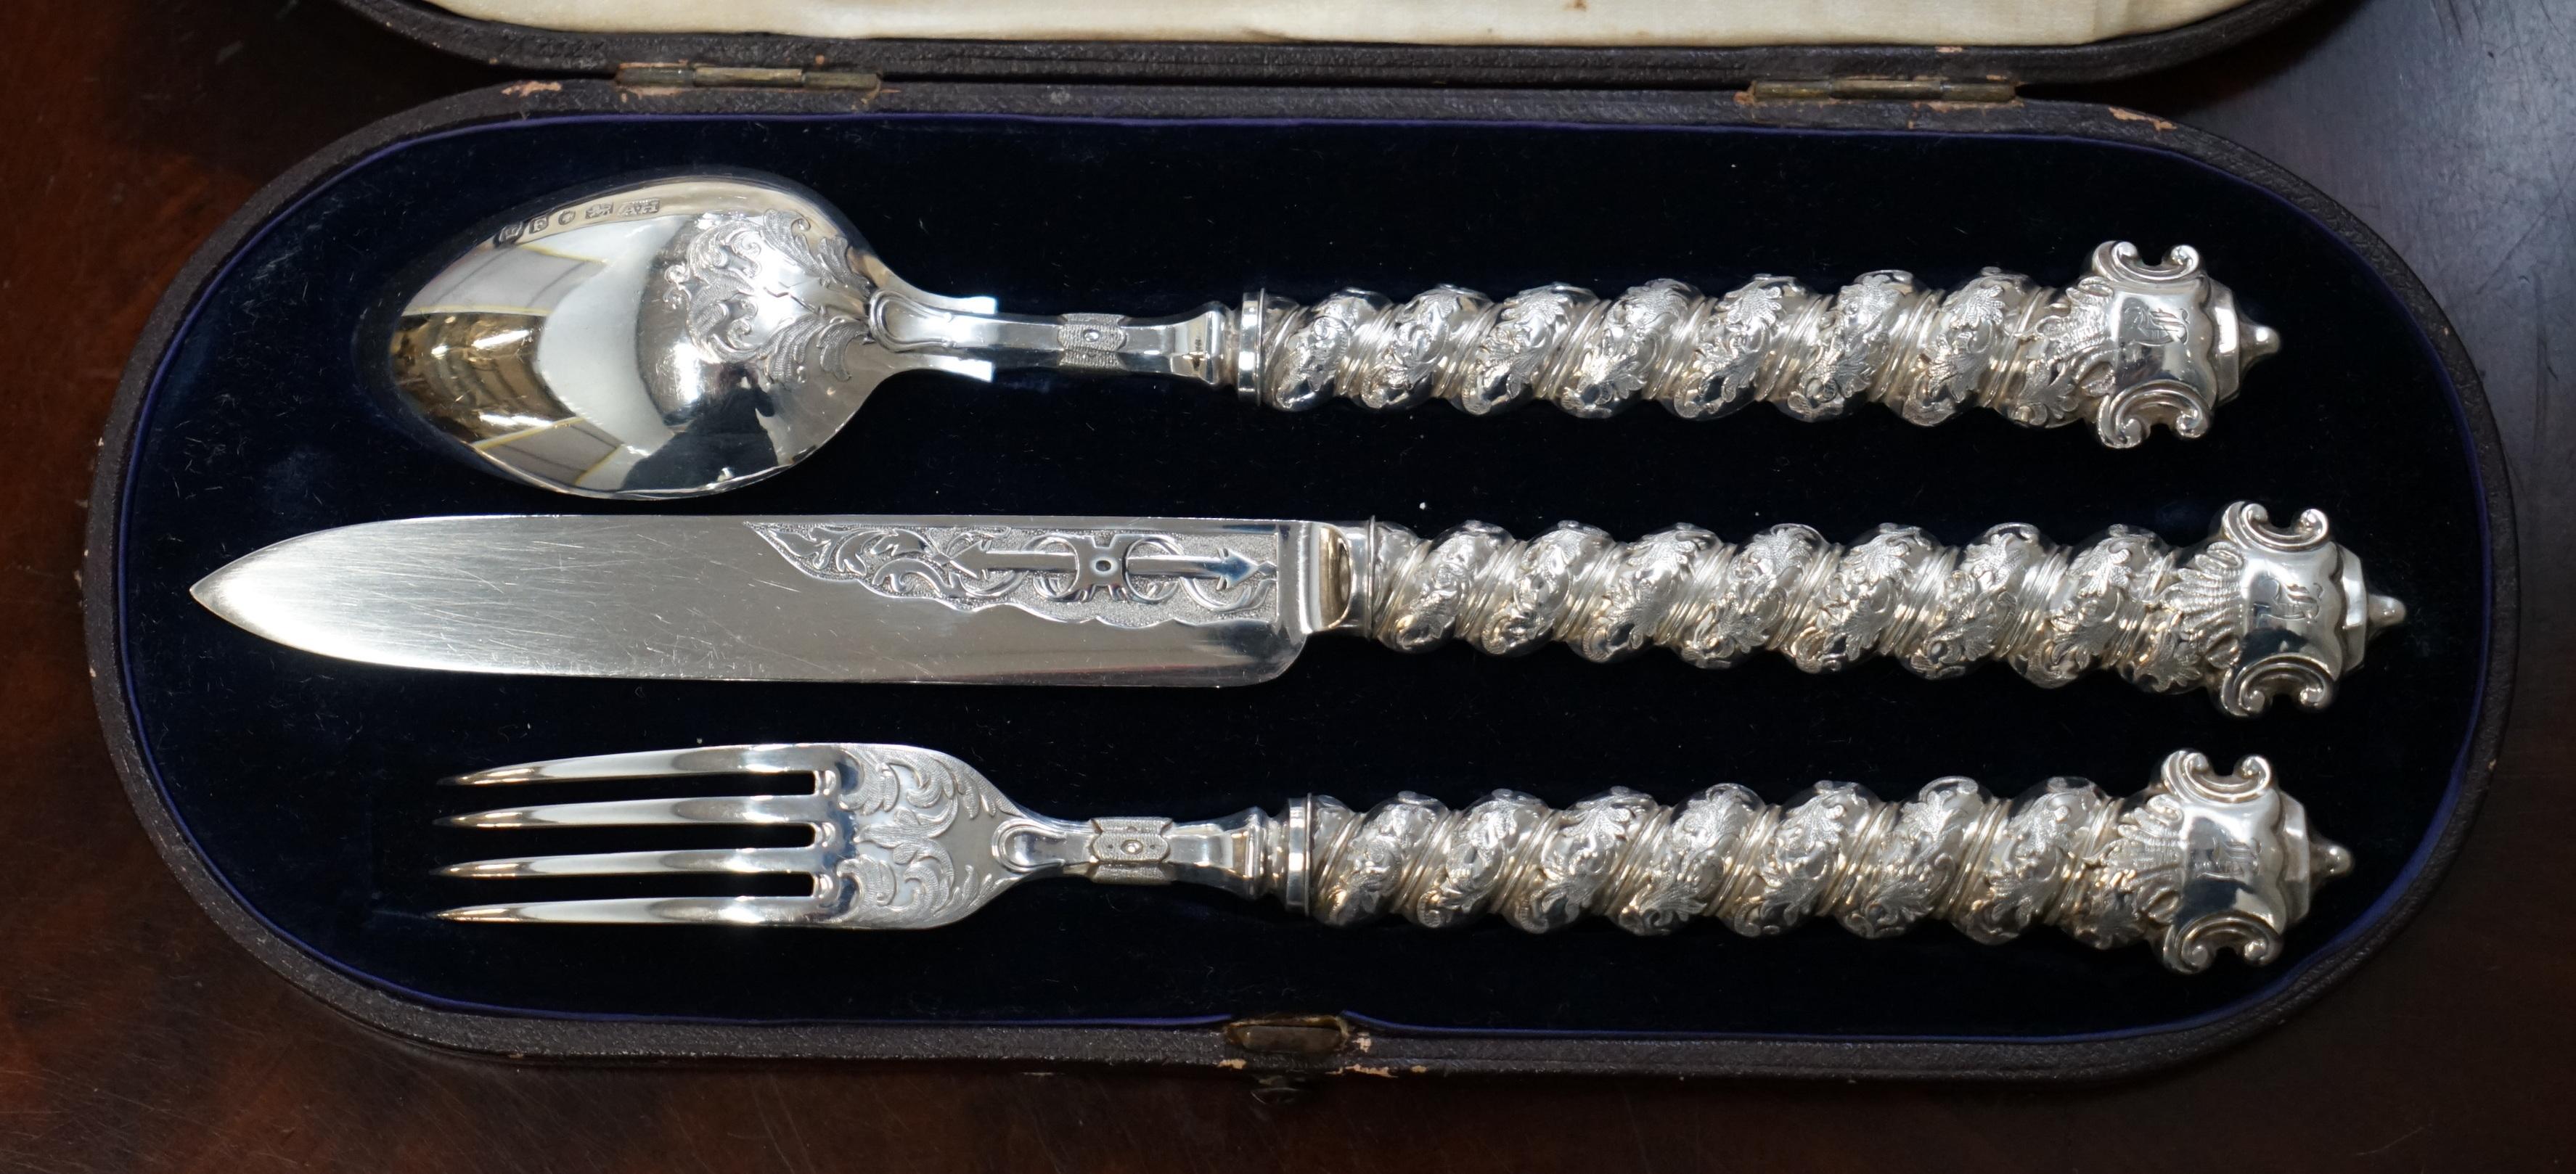 We are delighted to offer for sale this very rare Arron Hadfield 1848-1849 solid sterling silver Christening set in original leather-bound silk lined presentation case with gold leaf writing 

A highly collectable set, I’ve never seen another so